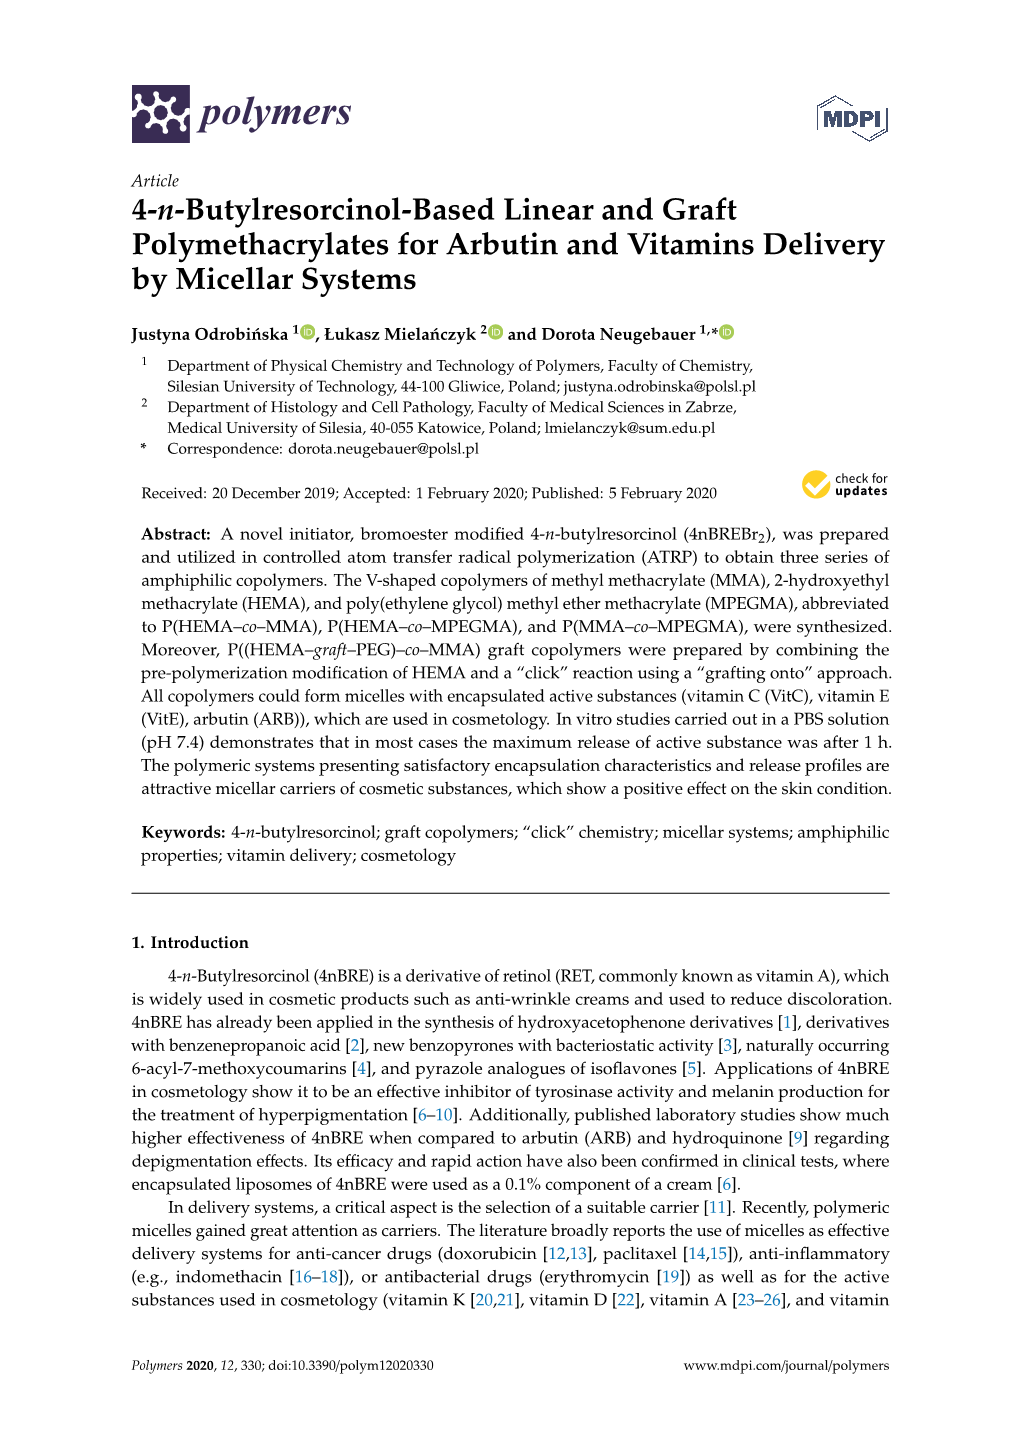 4-N-Butylresorcinol-Based Linear and Graft Polymethacrylates for Arbutin and Vitamins Delivery by Micellar Systems